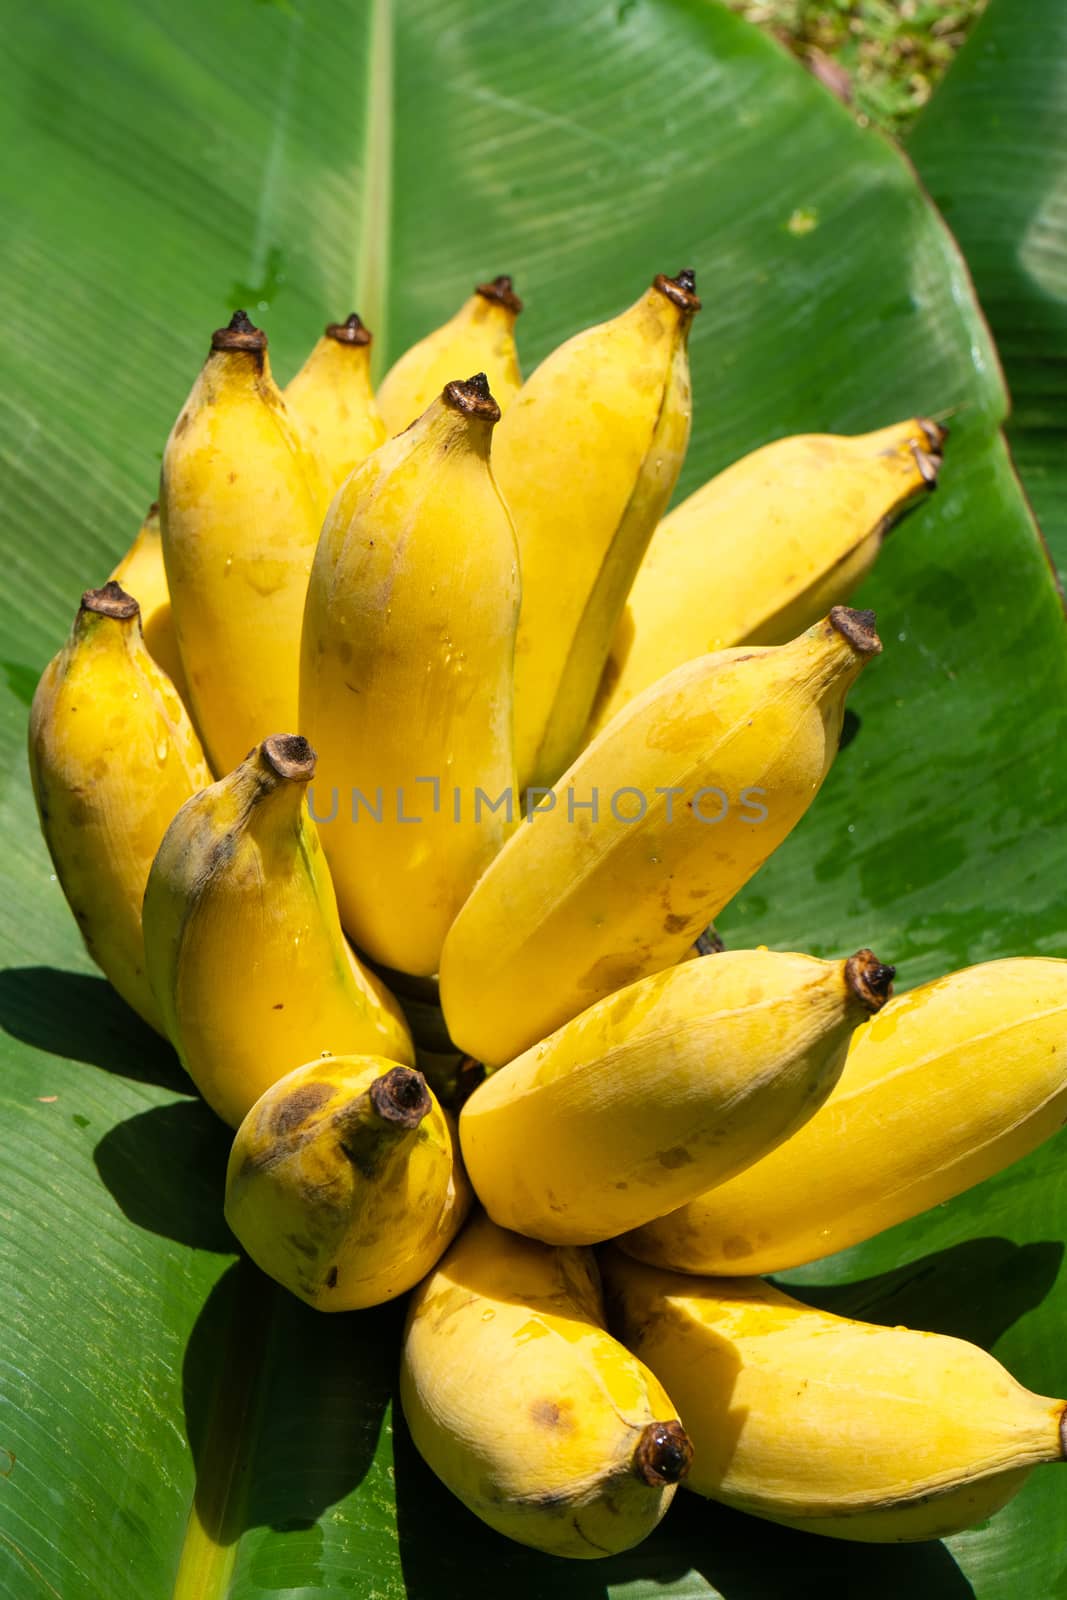 A branch of juicy yellow bananas on a green banana leaf. Ripe juicy fruits